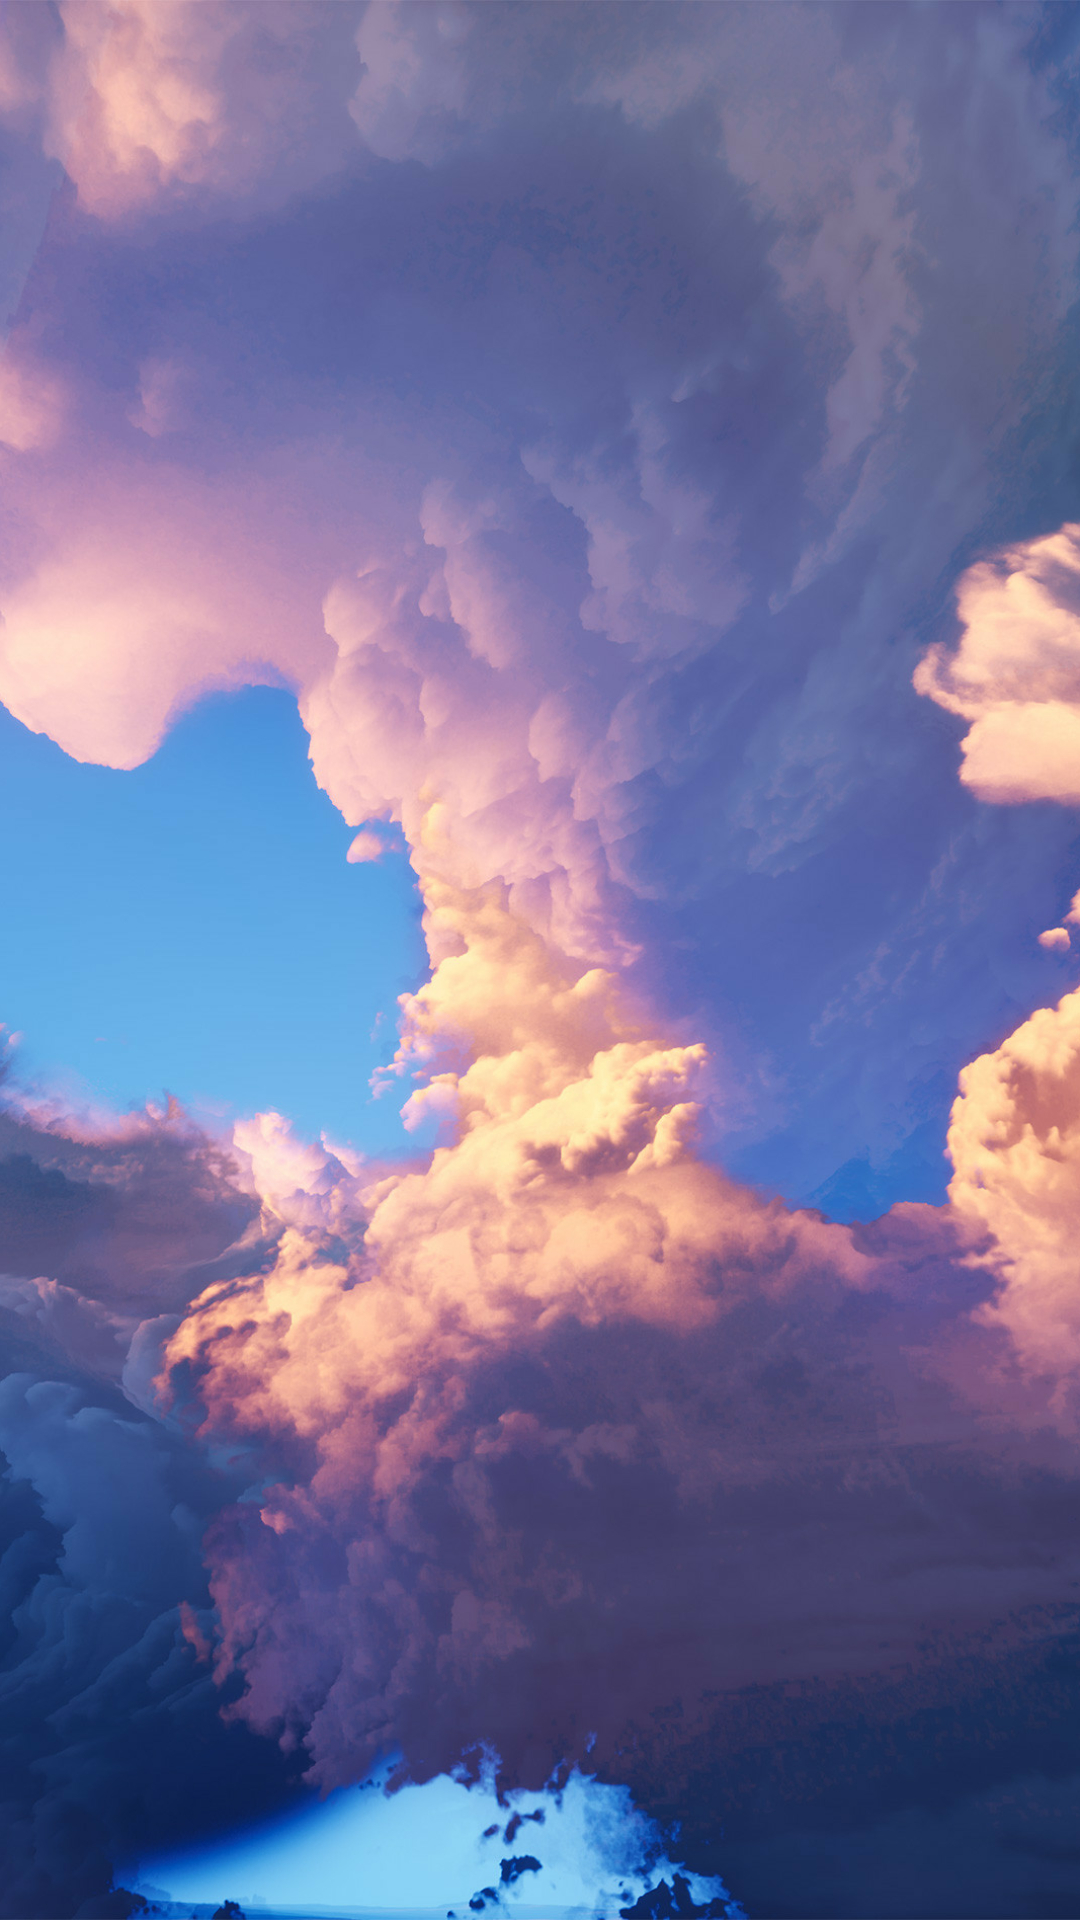 Artistic Clouds by Tyler Smith